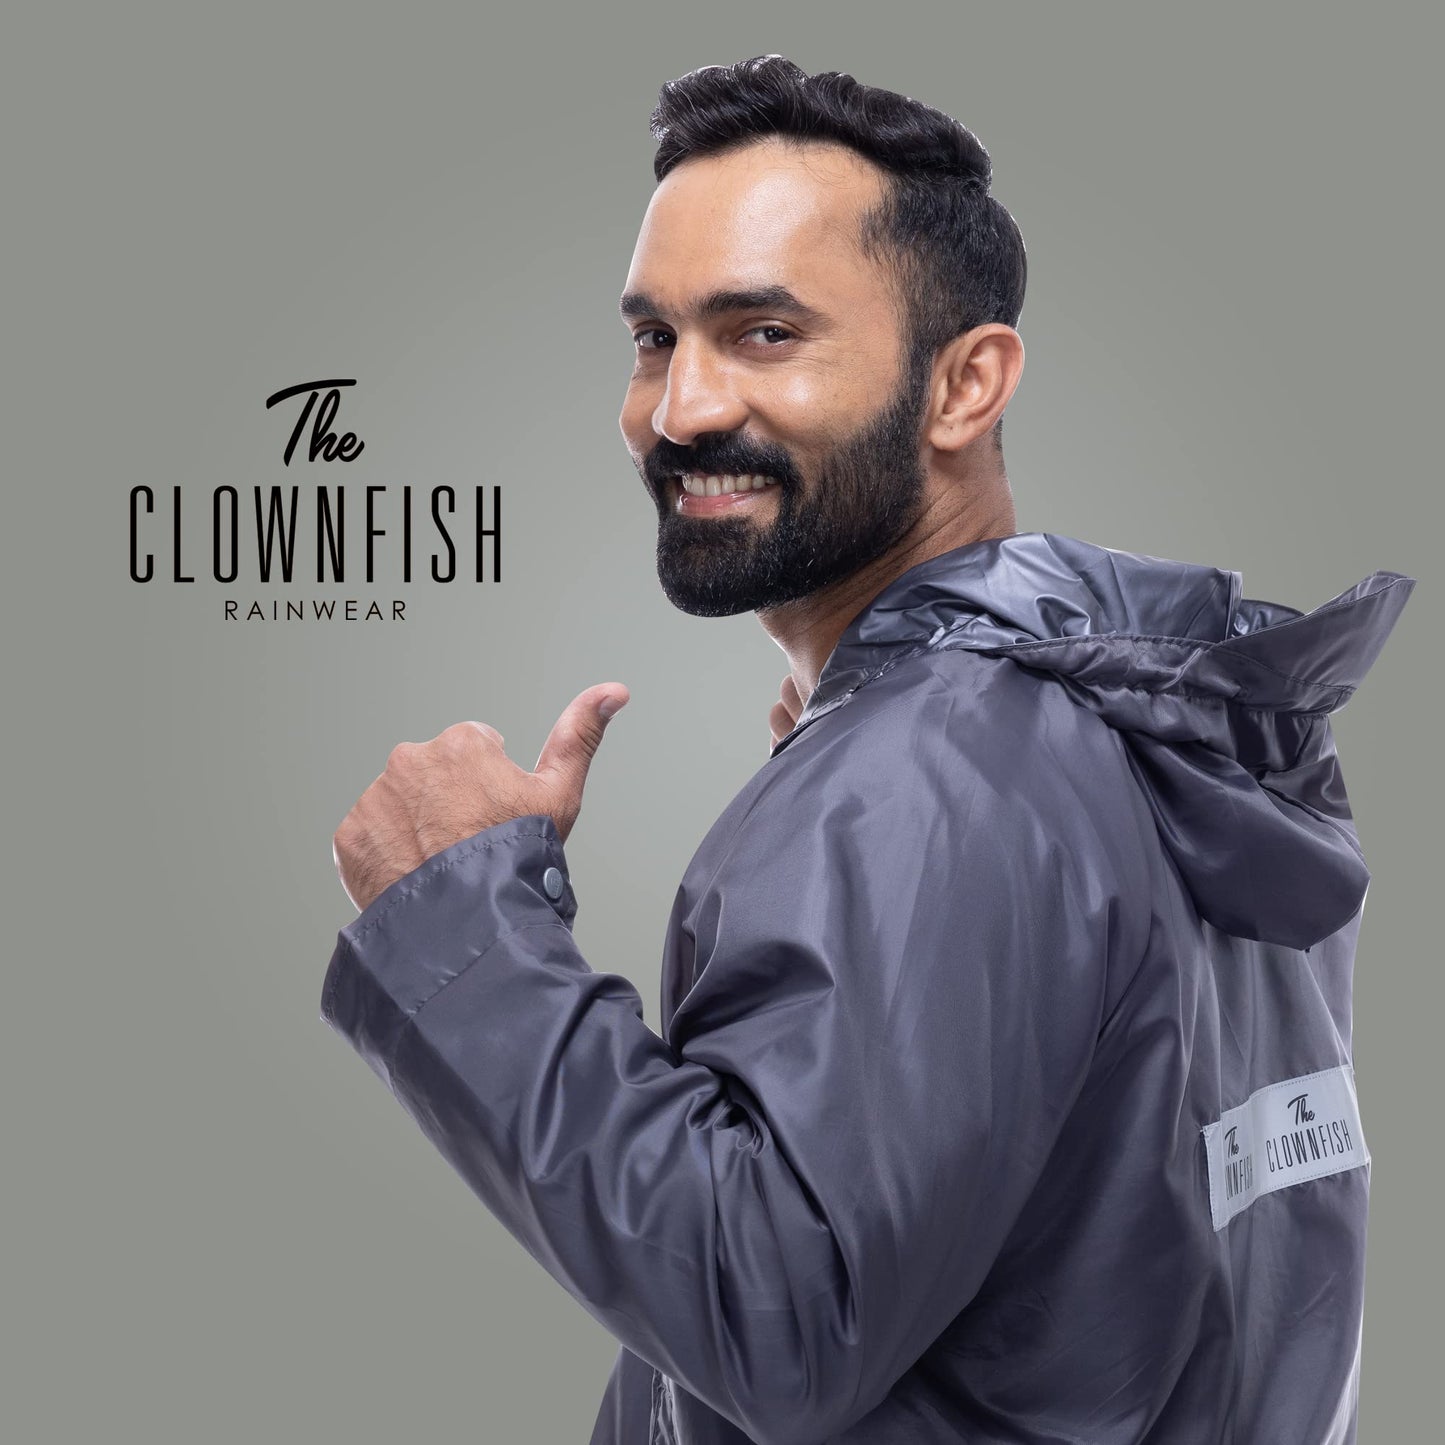 THE CLOWNFISH Cyrus Series Men's Waterproof Polyester Double Coating Reversible Raincoat with Hood and Reflector Logo at Back. Set of Top and Bottom. Printed Plastic Pouch with Rope (Grey, Large)